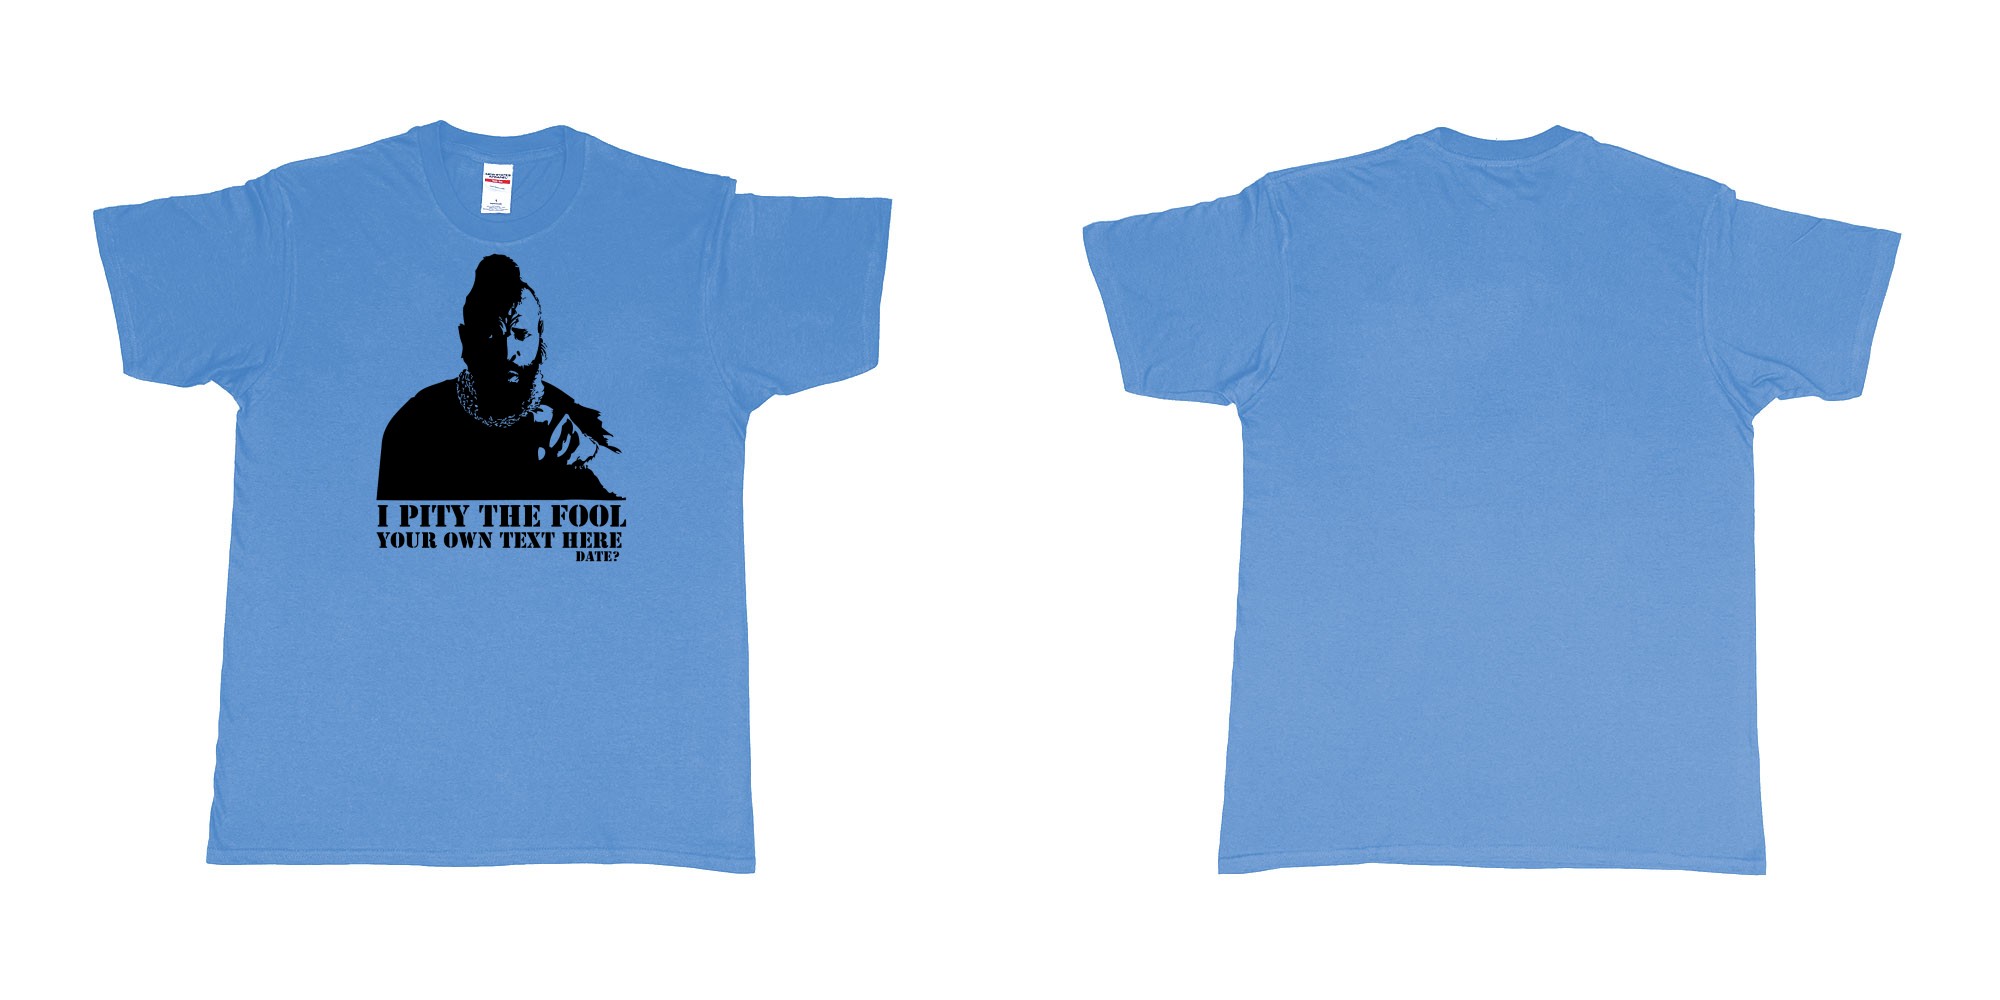 Custom tshirt design I pity the fool in fabric color carolina-blue choice your own text made in Bali by The Pirate Way